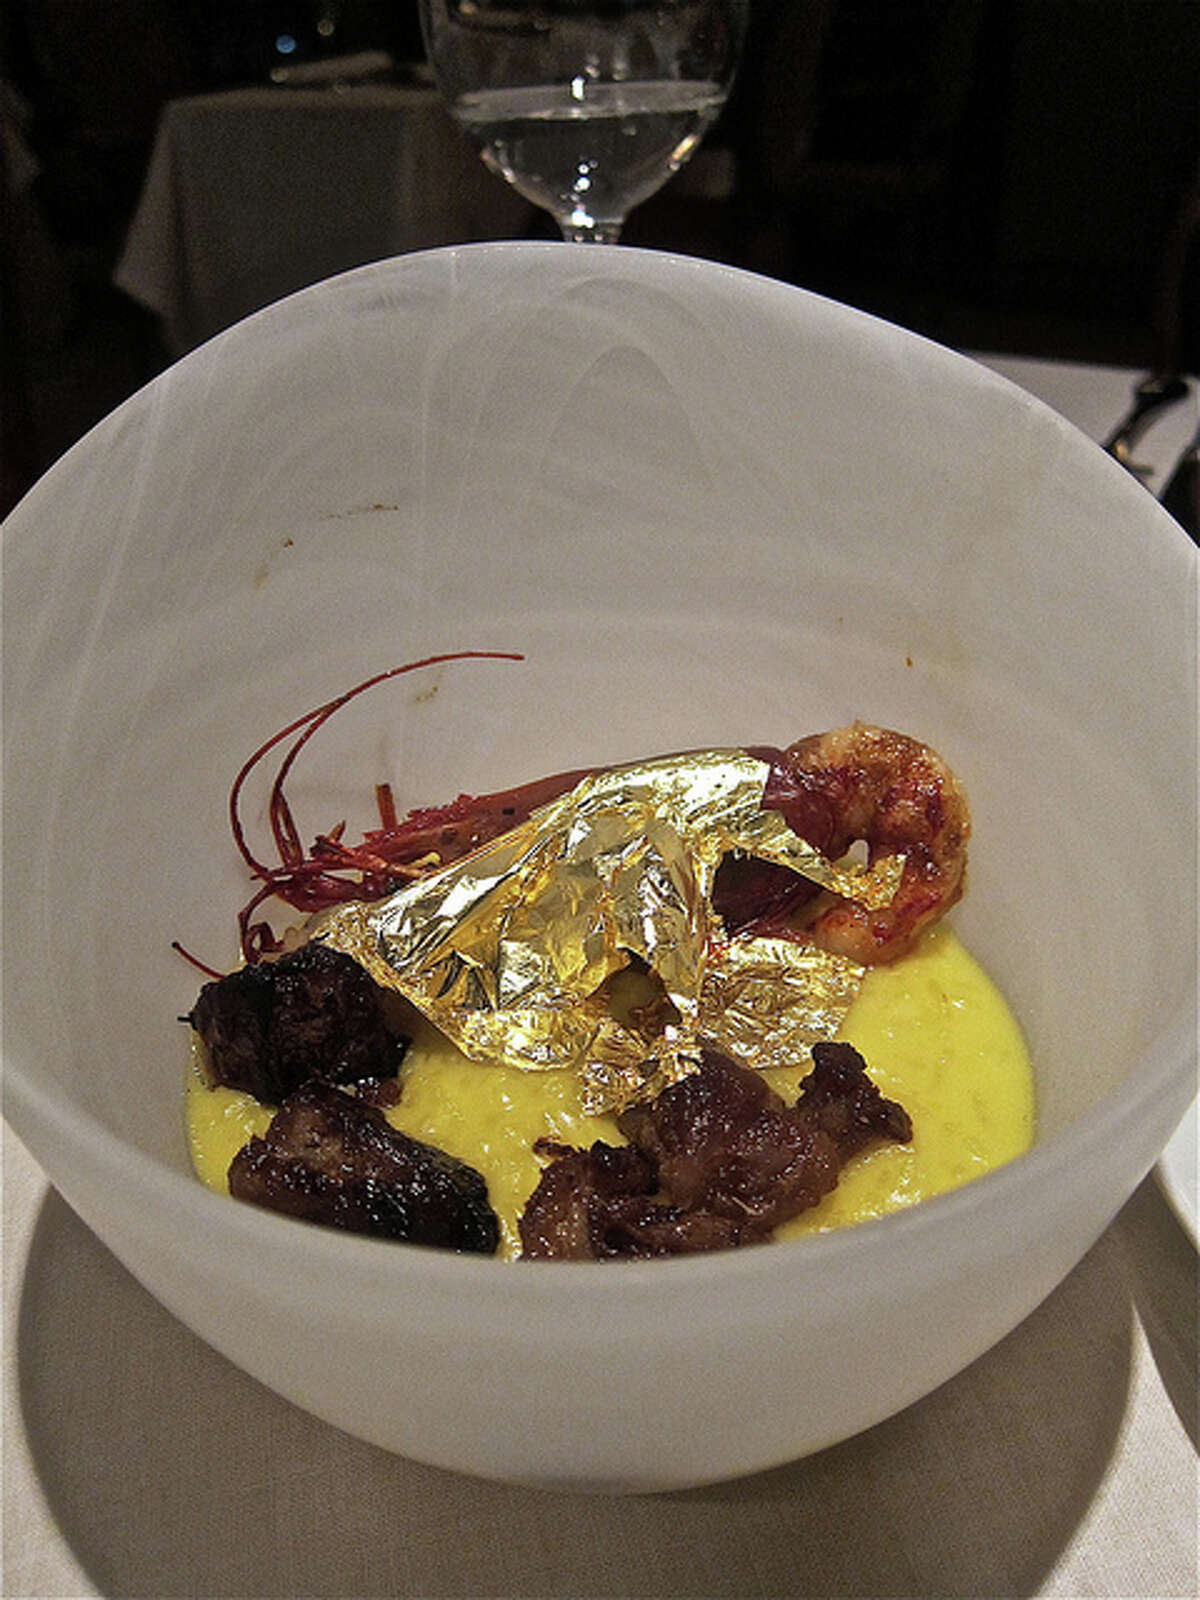 Risotto with bone marrow and whole prawn blanketed with edible gold leaf, at Ristorante Cavour